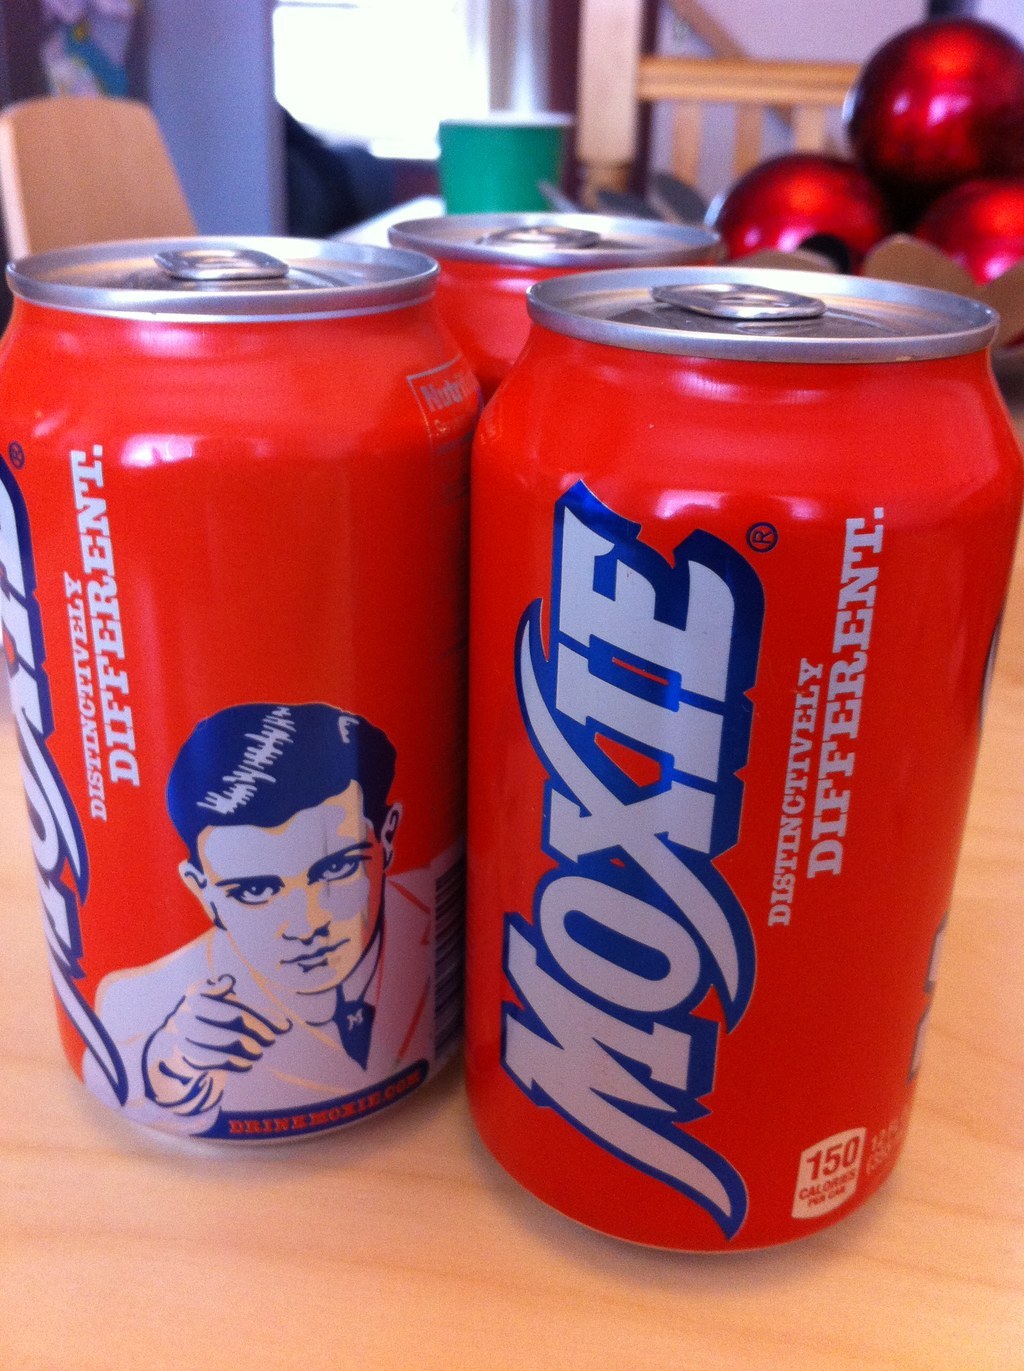 What is Moxie soda and why is it famous?